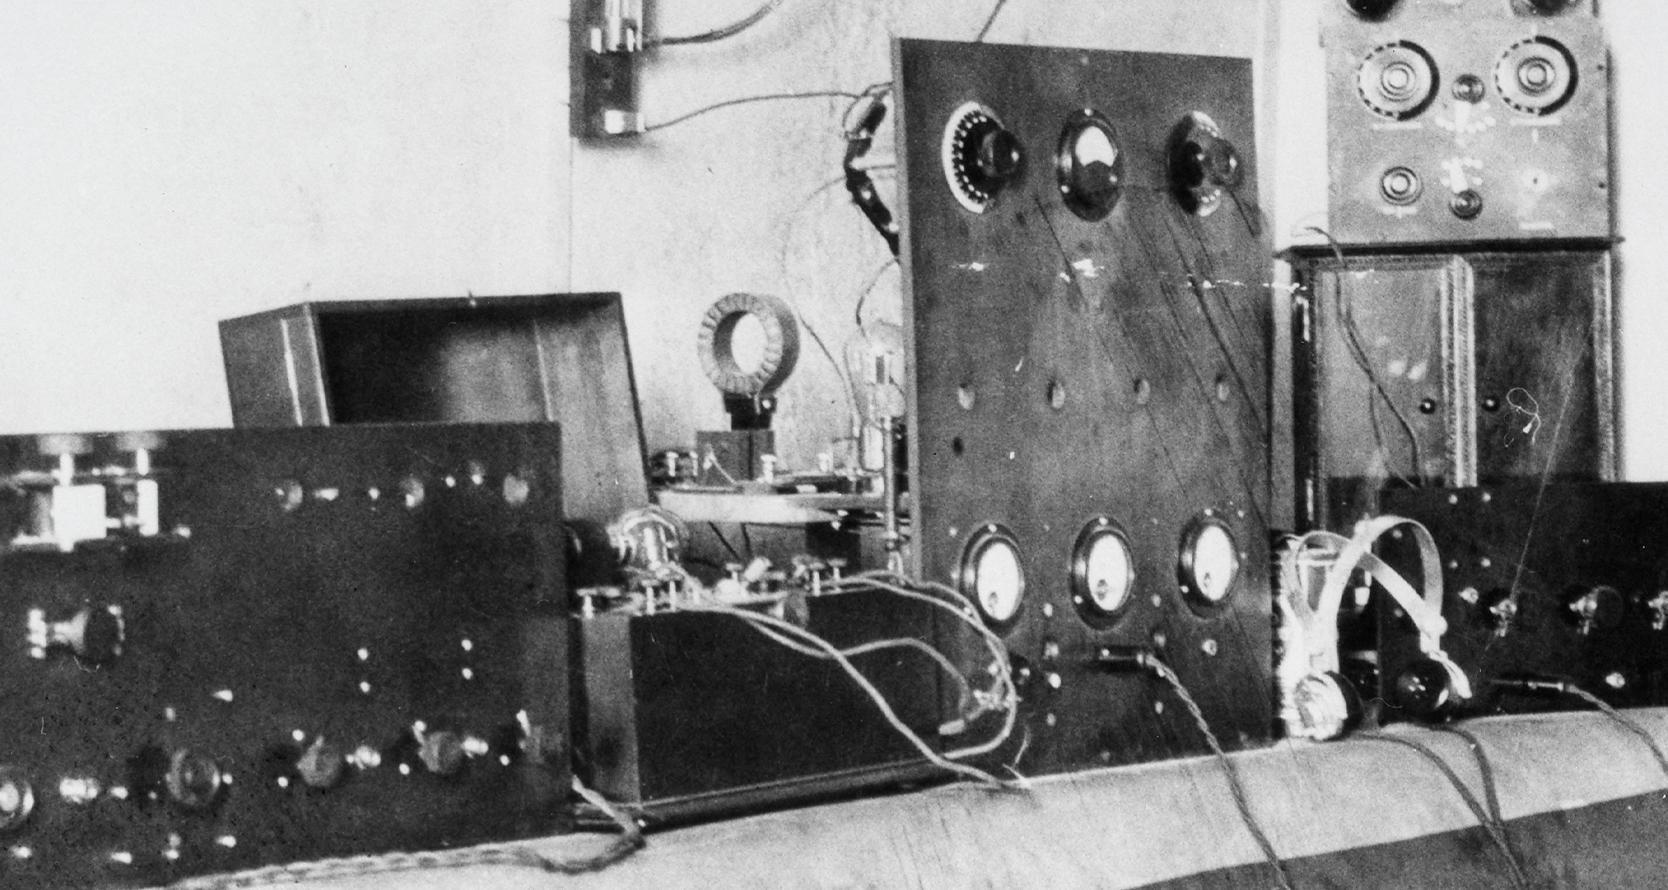 Close up of some radio and sound equipment from the early-mid 1920s